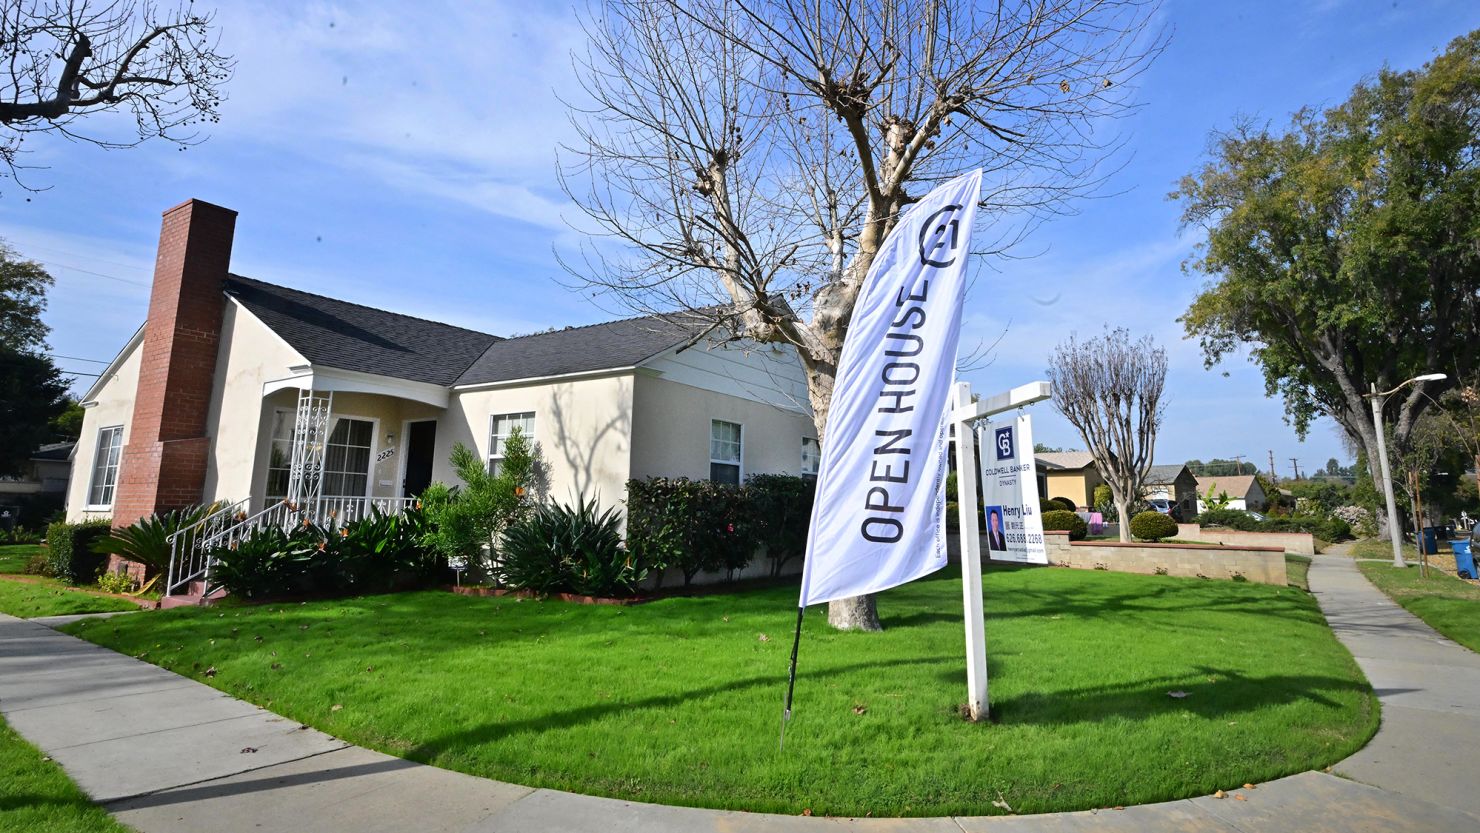 Super Bowl weekend is the unofficial kick-off to the spring homebuying and selling season.